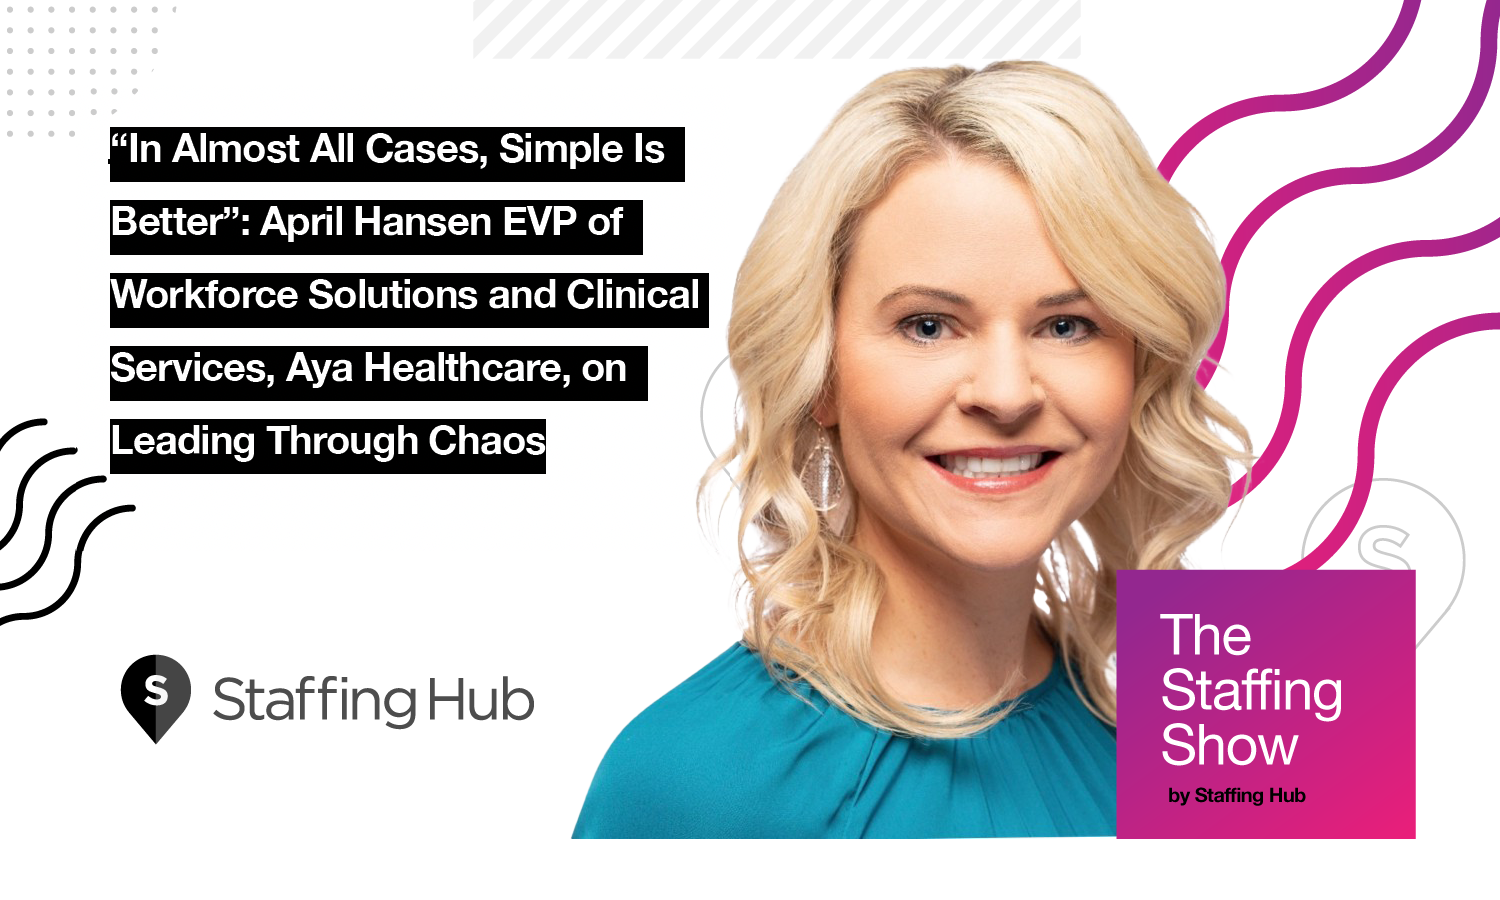 “In Almost All Cases, Simple Is Better”: April Hansen EVP of Workforce Solutions and Clinical Services, Aya Healthcare, on Leading Through Chaos